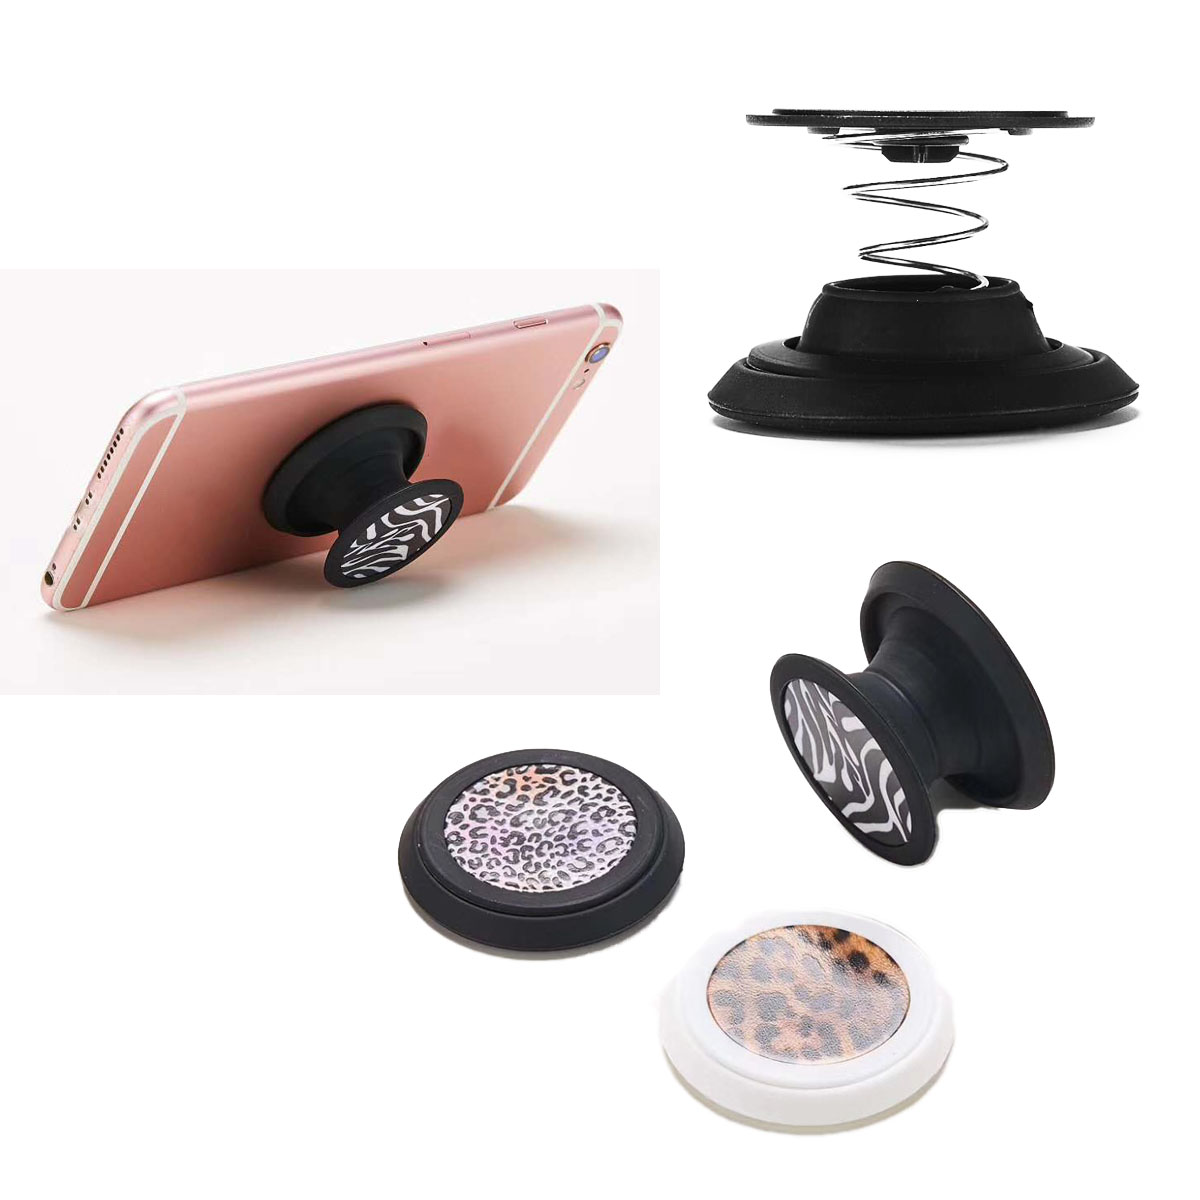 GL-AKL0114 Silicone Spring Phone Stand